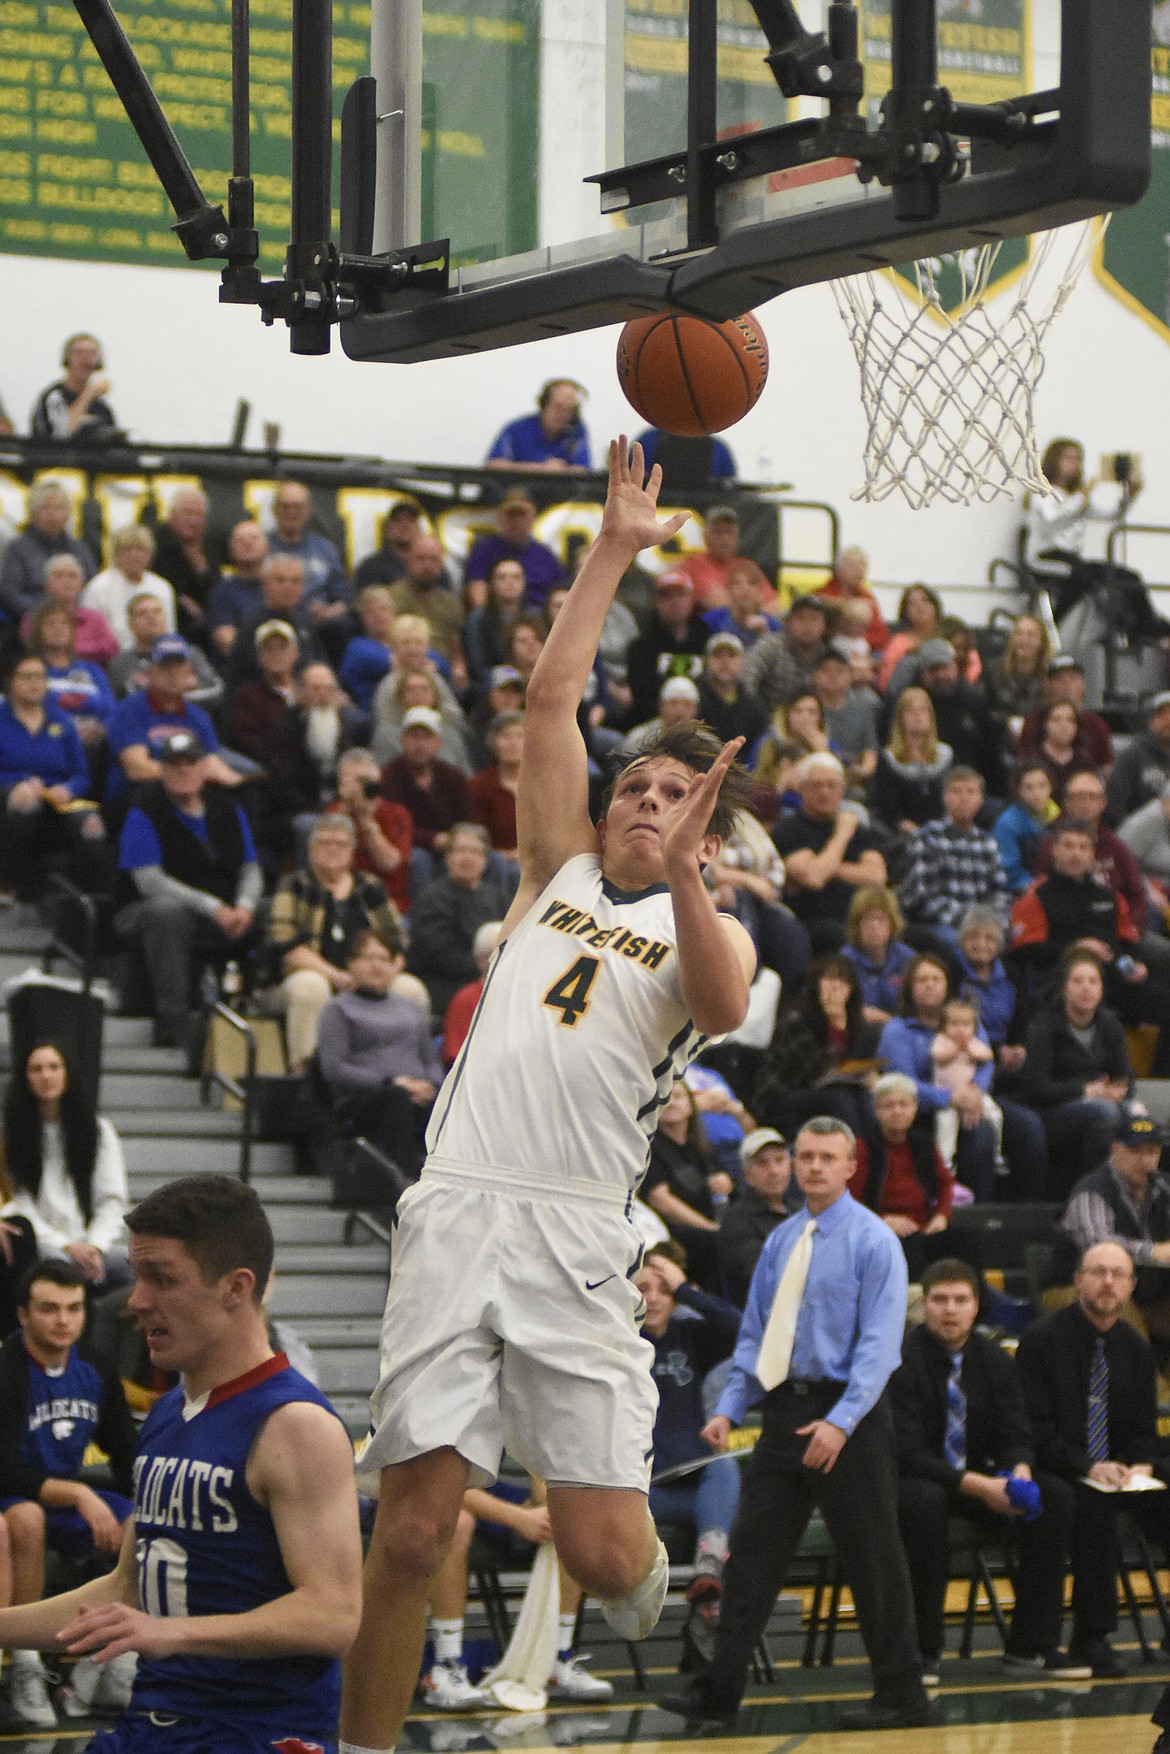 Jack Schwaiger soars for the layup during the Bulldogs&#146; 60-45 win over Columbia Falls on Thursday. (Daniel McKay/Whitefish Pilot)